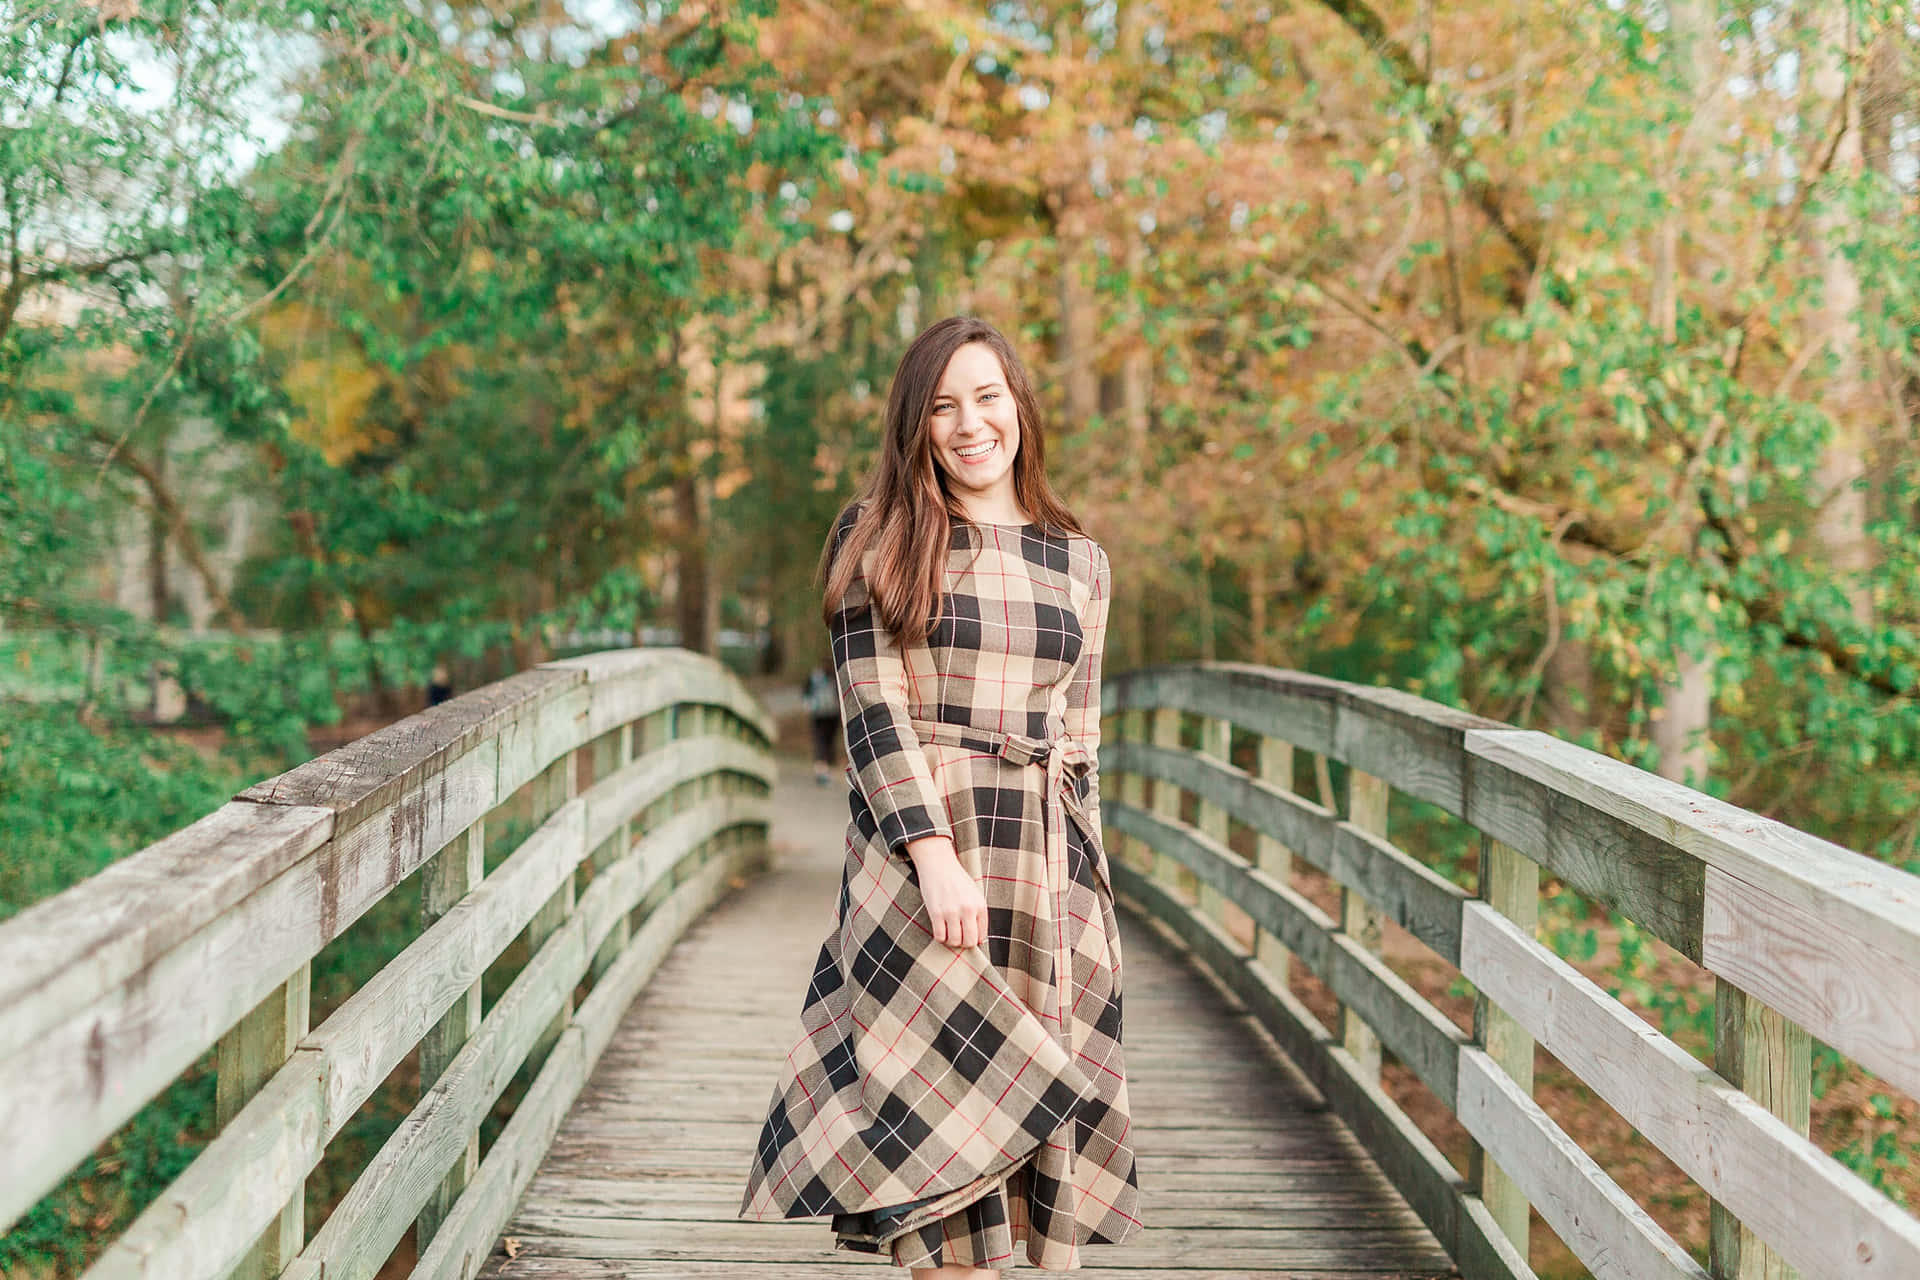 Capturing memories during the Fall season: Fall Senior Pictures